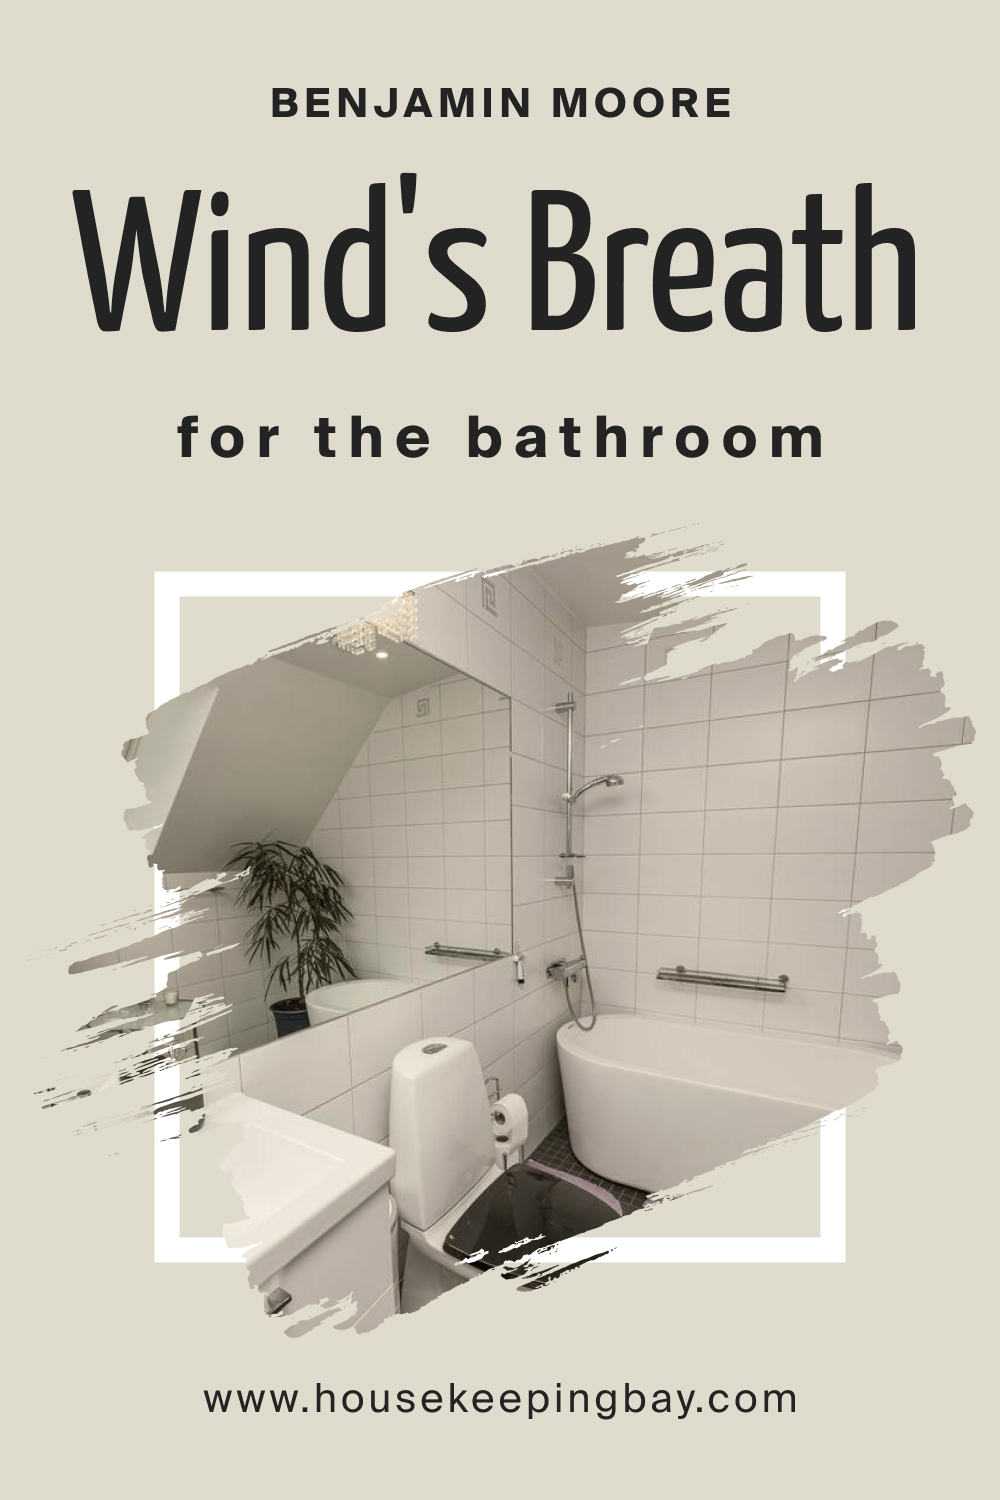 How to Use BM Wind's Breath 981 in the Bathroom?